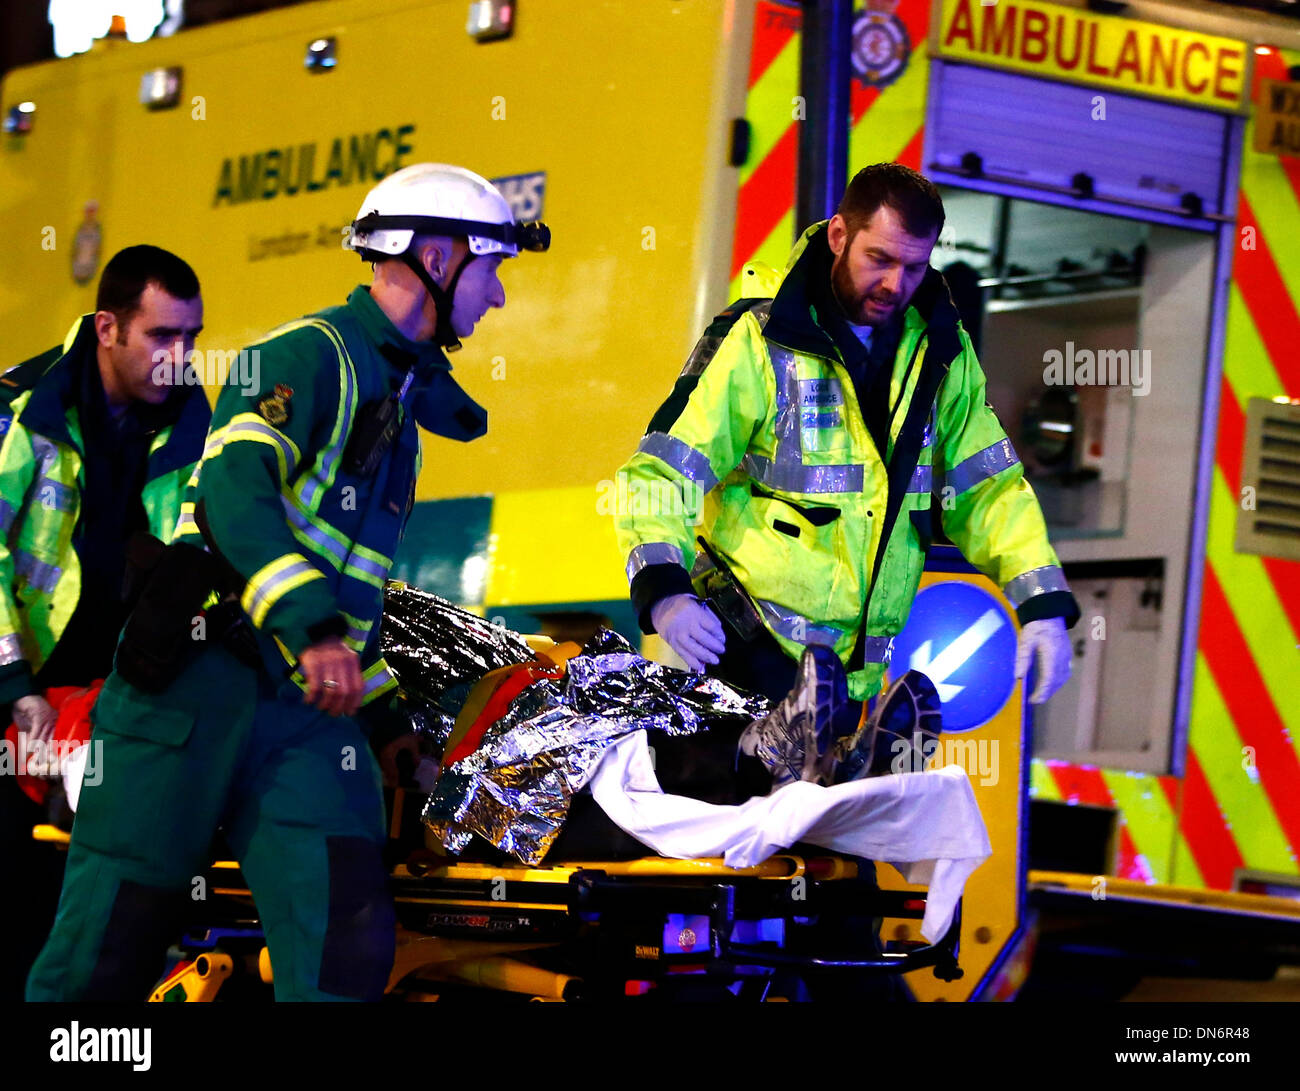 London. 20th Dec, 2013. An injured person is taken towards a waiting ambulance on a stretcher following a roof collapse at a theatre in central London on Dec. 19, 2013. Some 88 people were injured, including 7 serious cases, after part of the roof in London's Apollo Theatre collapsed on Thursday. Credit:  Yin Gang/Xinhua/Alamy Live News Stock Photo